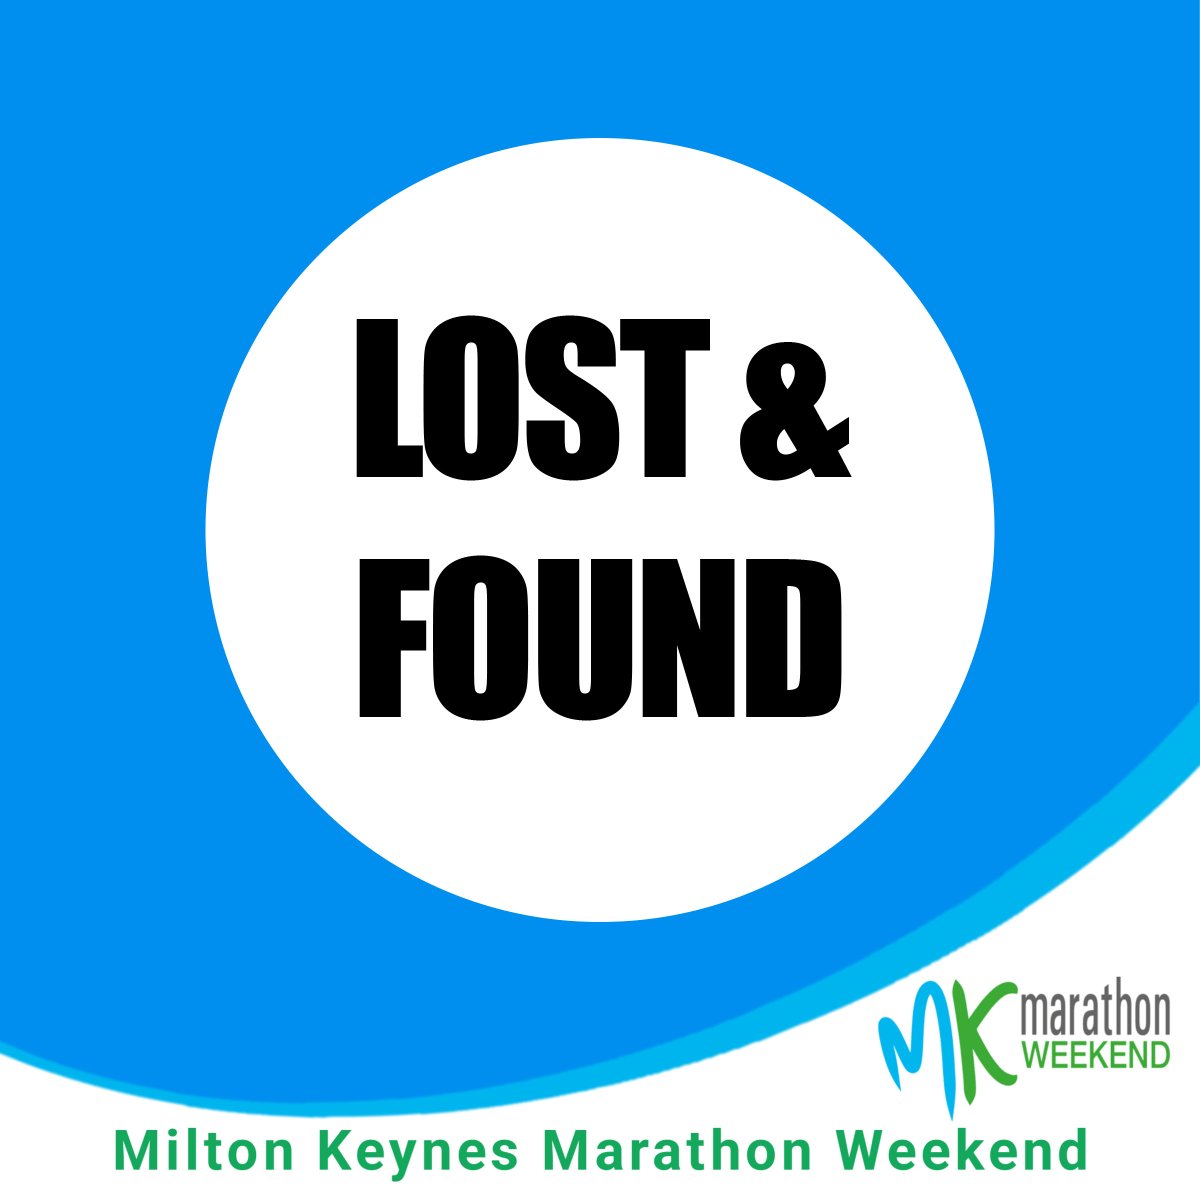 LOST AND FOUND We have a few items that were left in the Stadium MK after our event. If you have lost any of the items below, please email us at run@miltonkeynesmarathon.co.uk describing the item PHONE KEY CREDIT CARD mkmarathon.com